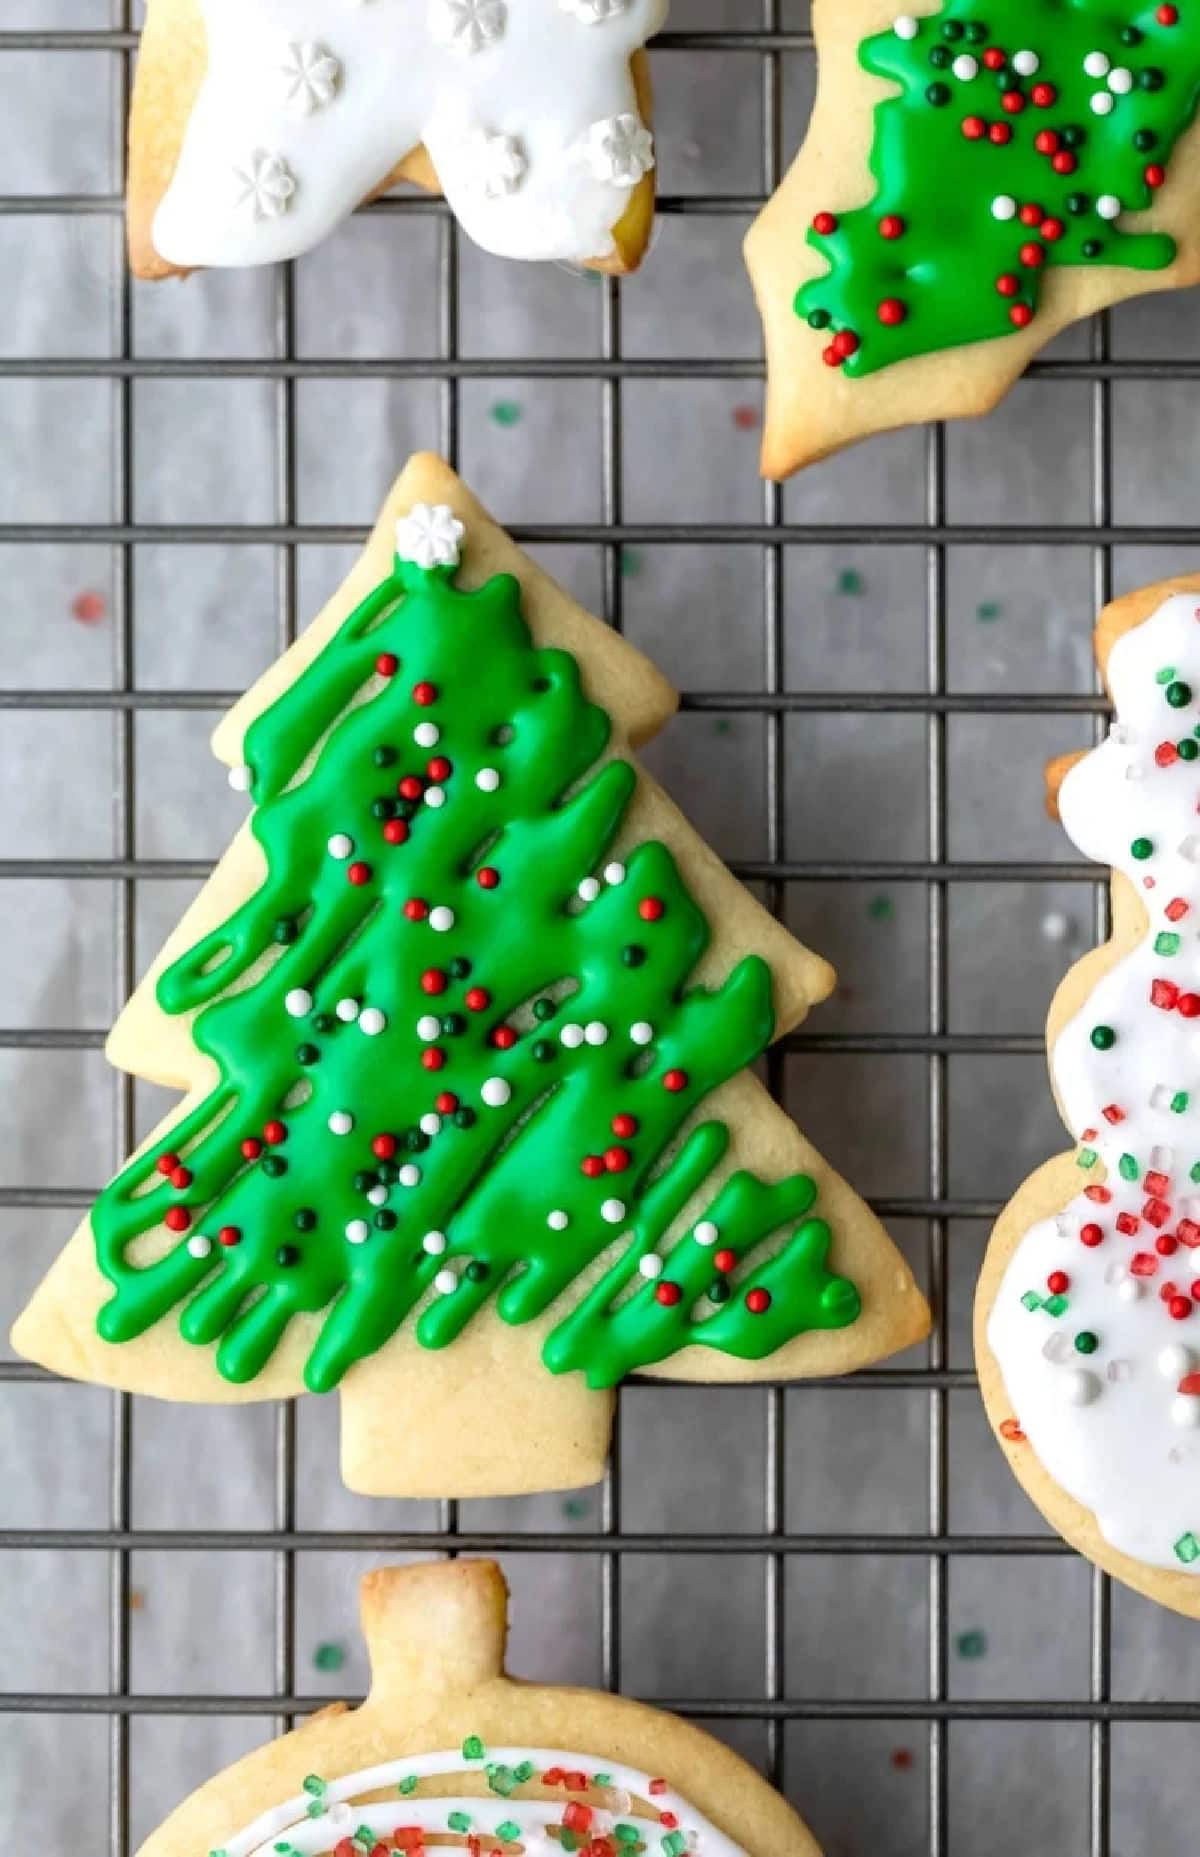 Tree shaped sugar cookie with green icing.